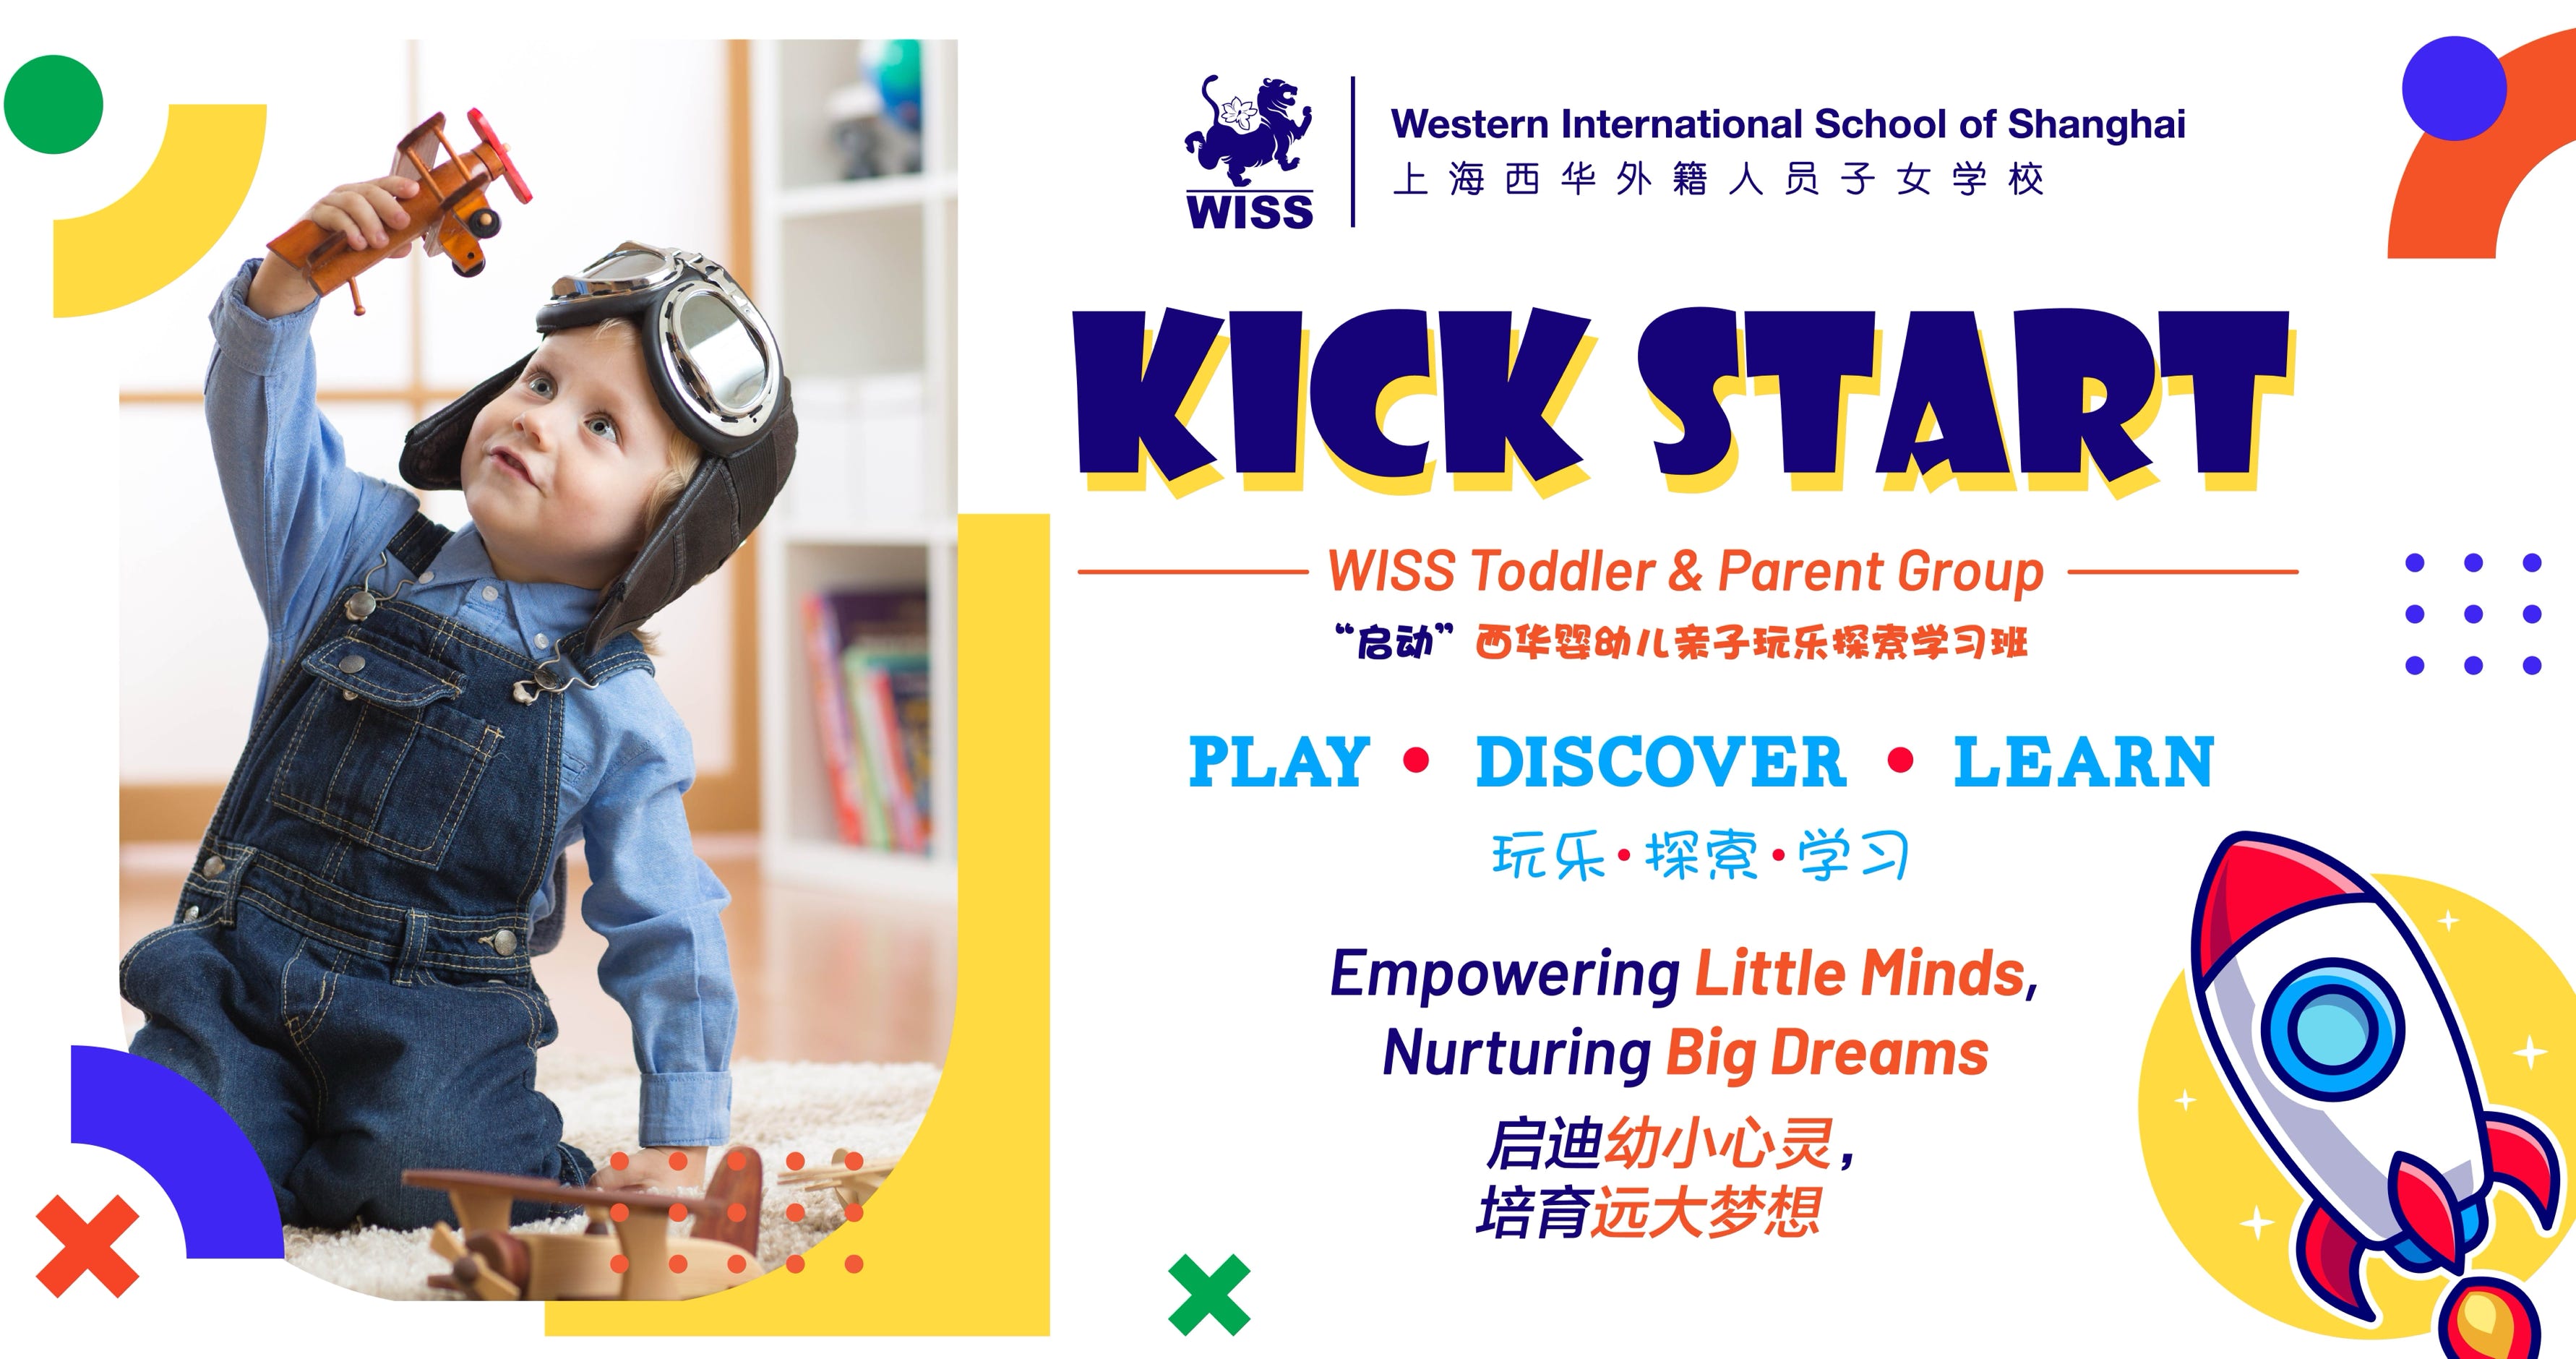 The Western International School of Shanghai (WISS) is thrilled to announce the launch of its exclusive toddler and parent group, Kickstart. Designed for children aged 18 months to 3 years old, Kickstart aims to provide a stimulating and nurturing environment where toddlers can develop foundational skills while bonding with their parents.  Kickstart offers a unique opportunity for parents and their toddlers to engage in a range of age-appropriate activities that foster cognitive, physical, social, and emotional development. Led by experienced early childhood educators, the programme focuses on enhancing key developmental areas through play-based learning and parent-child interactions.